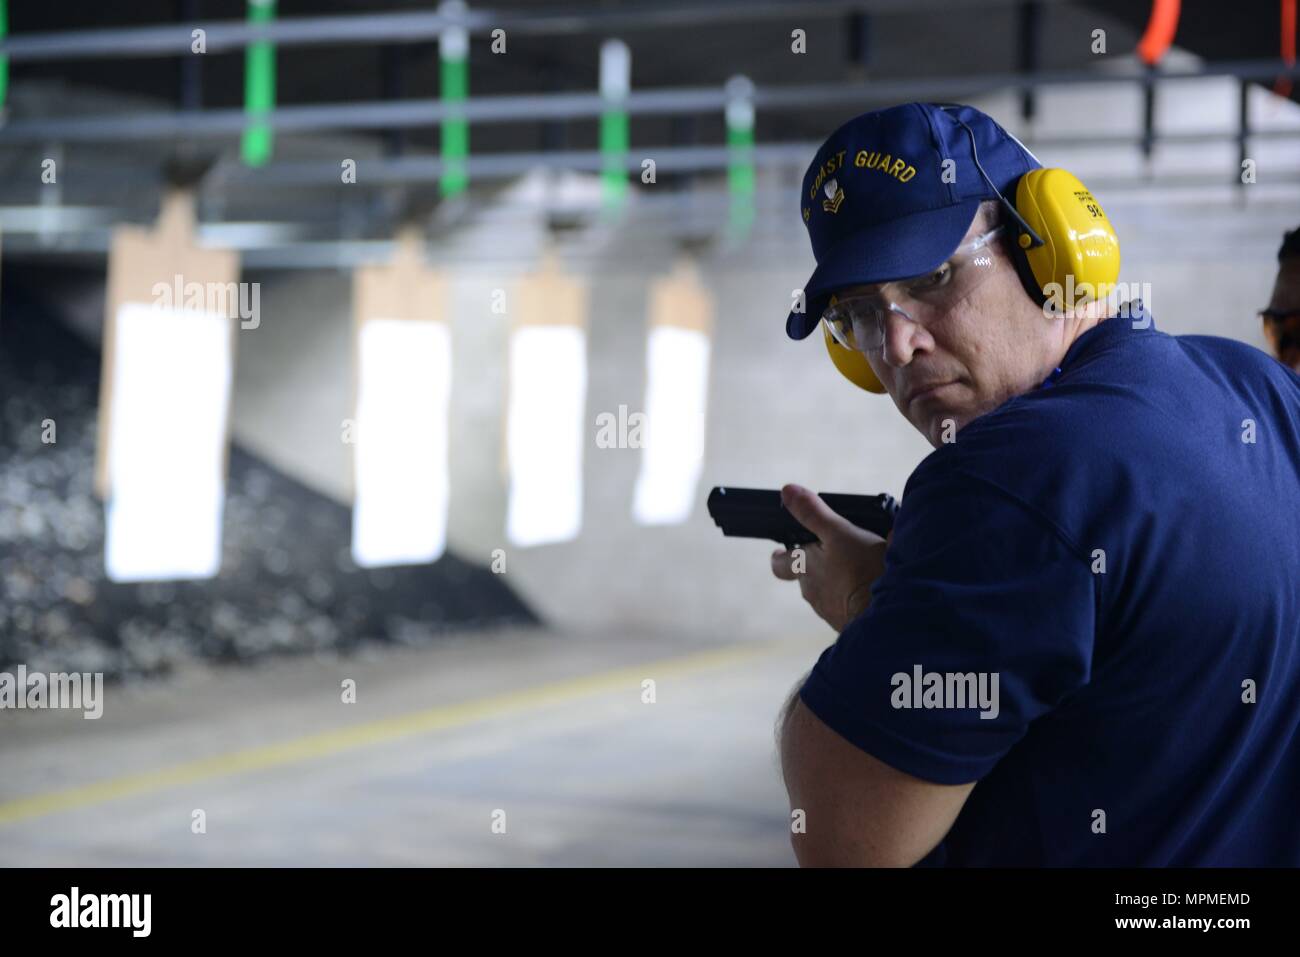 Petty Officer 2nd Class Jason Desrosiers, a maritime enforcement specialist at Coast Guard Sector Honolulu, visually scans his surroundings while conducting a live fire exercise during a Firearms Training and Evaluation – Pistol course at the Dexter Small Arms Firing Range at Base Honolulu, March 28, 2017. The FT&E-P, which will replace the Basic Pistol Marksmanship Course, will qualify Coast Guard law enforcement personnel using a four-phased approach of training, practice, qualification and proficiency. (U.S. Coast Guard photo by Petty Officer 2nd Class Tara Molle/Released) Stock Photo